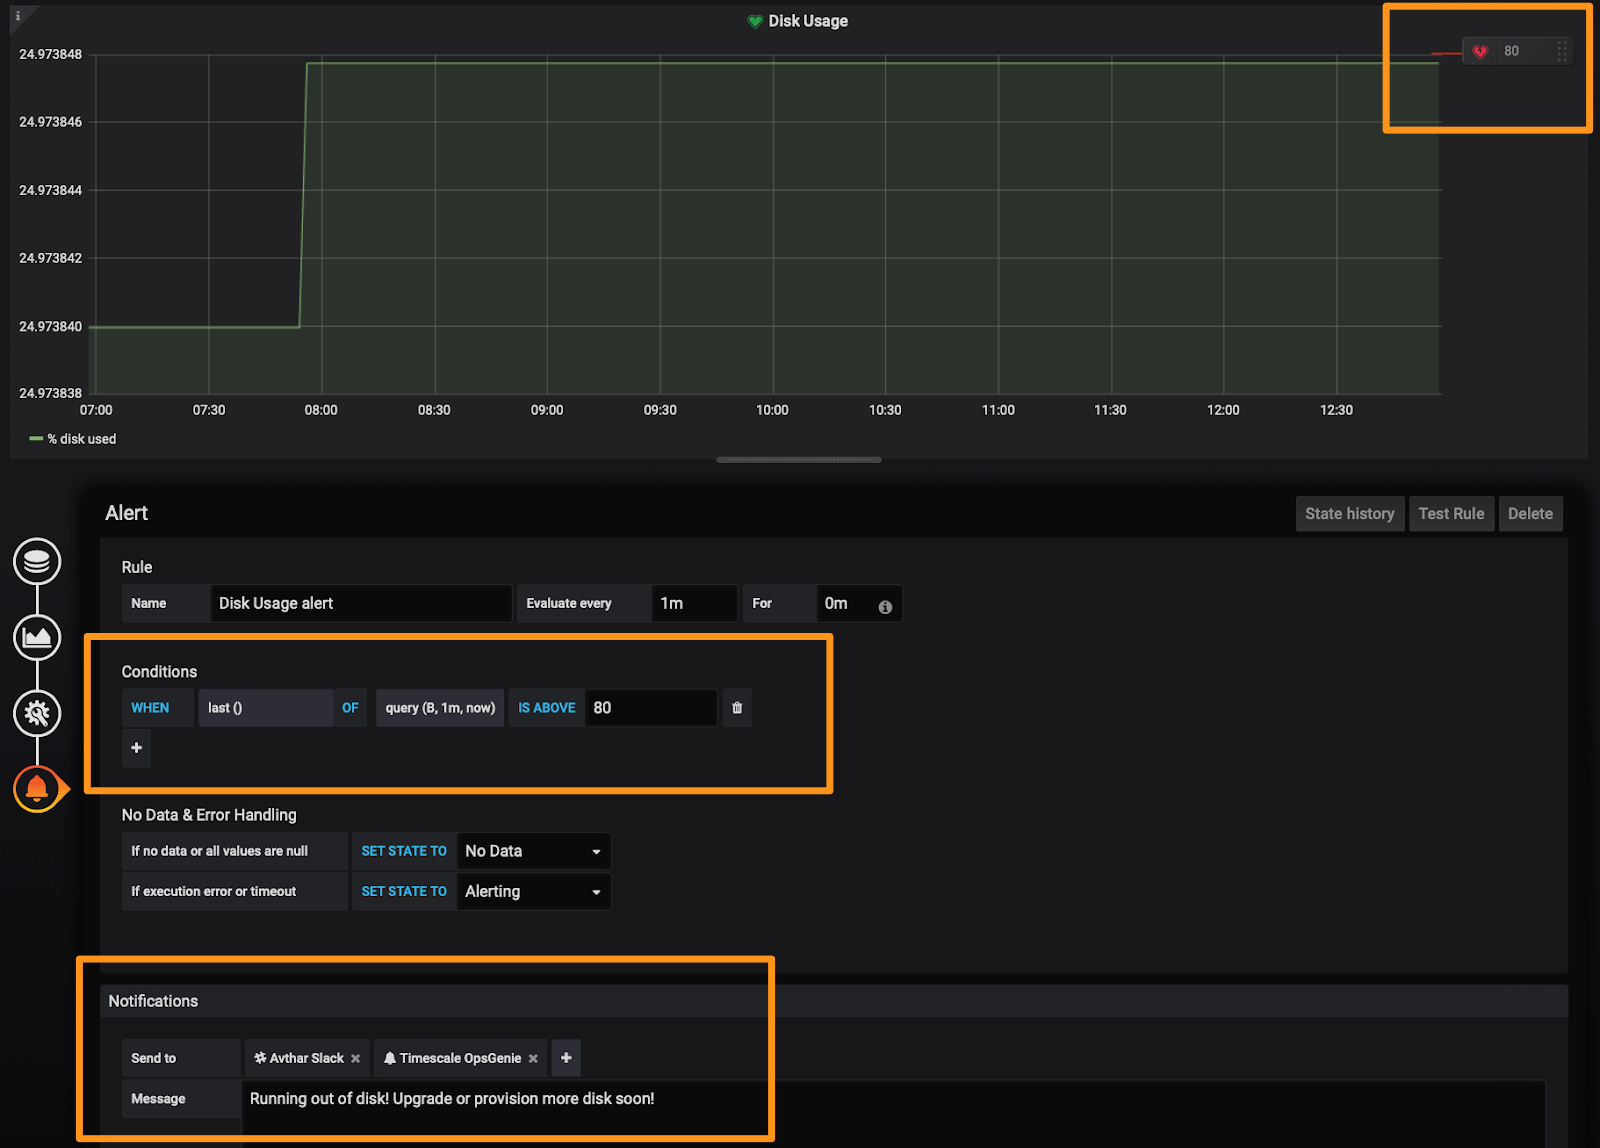 Grafana alert panel showing settings for alert about disk usage